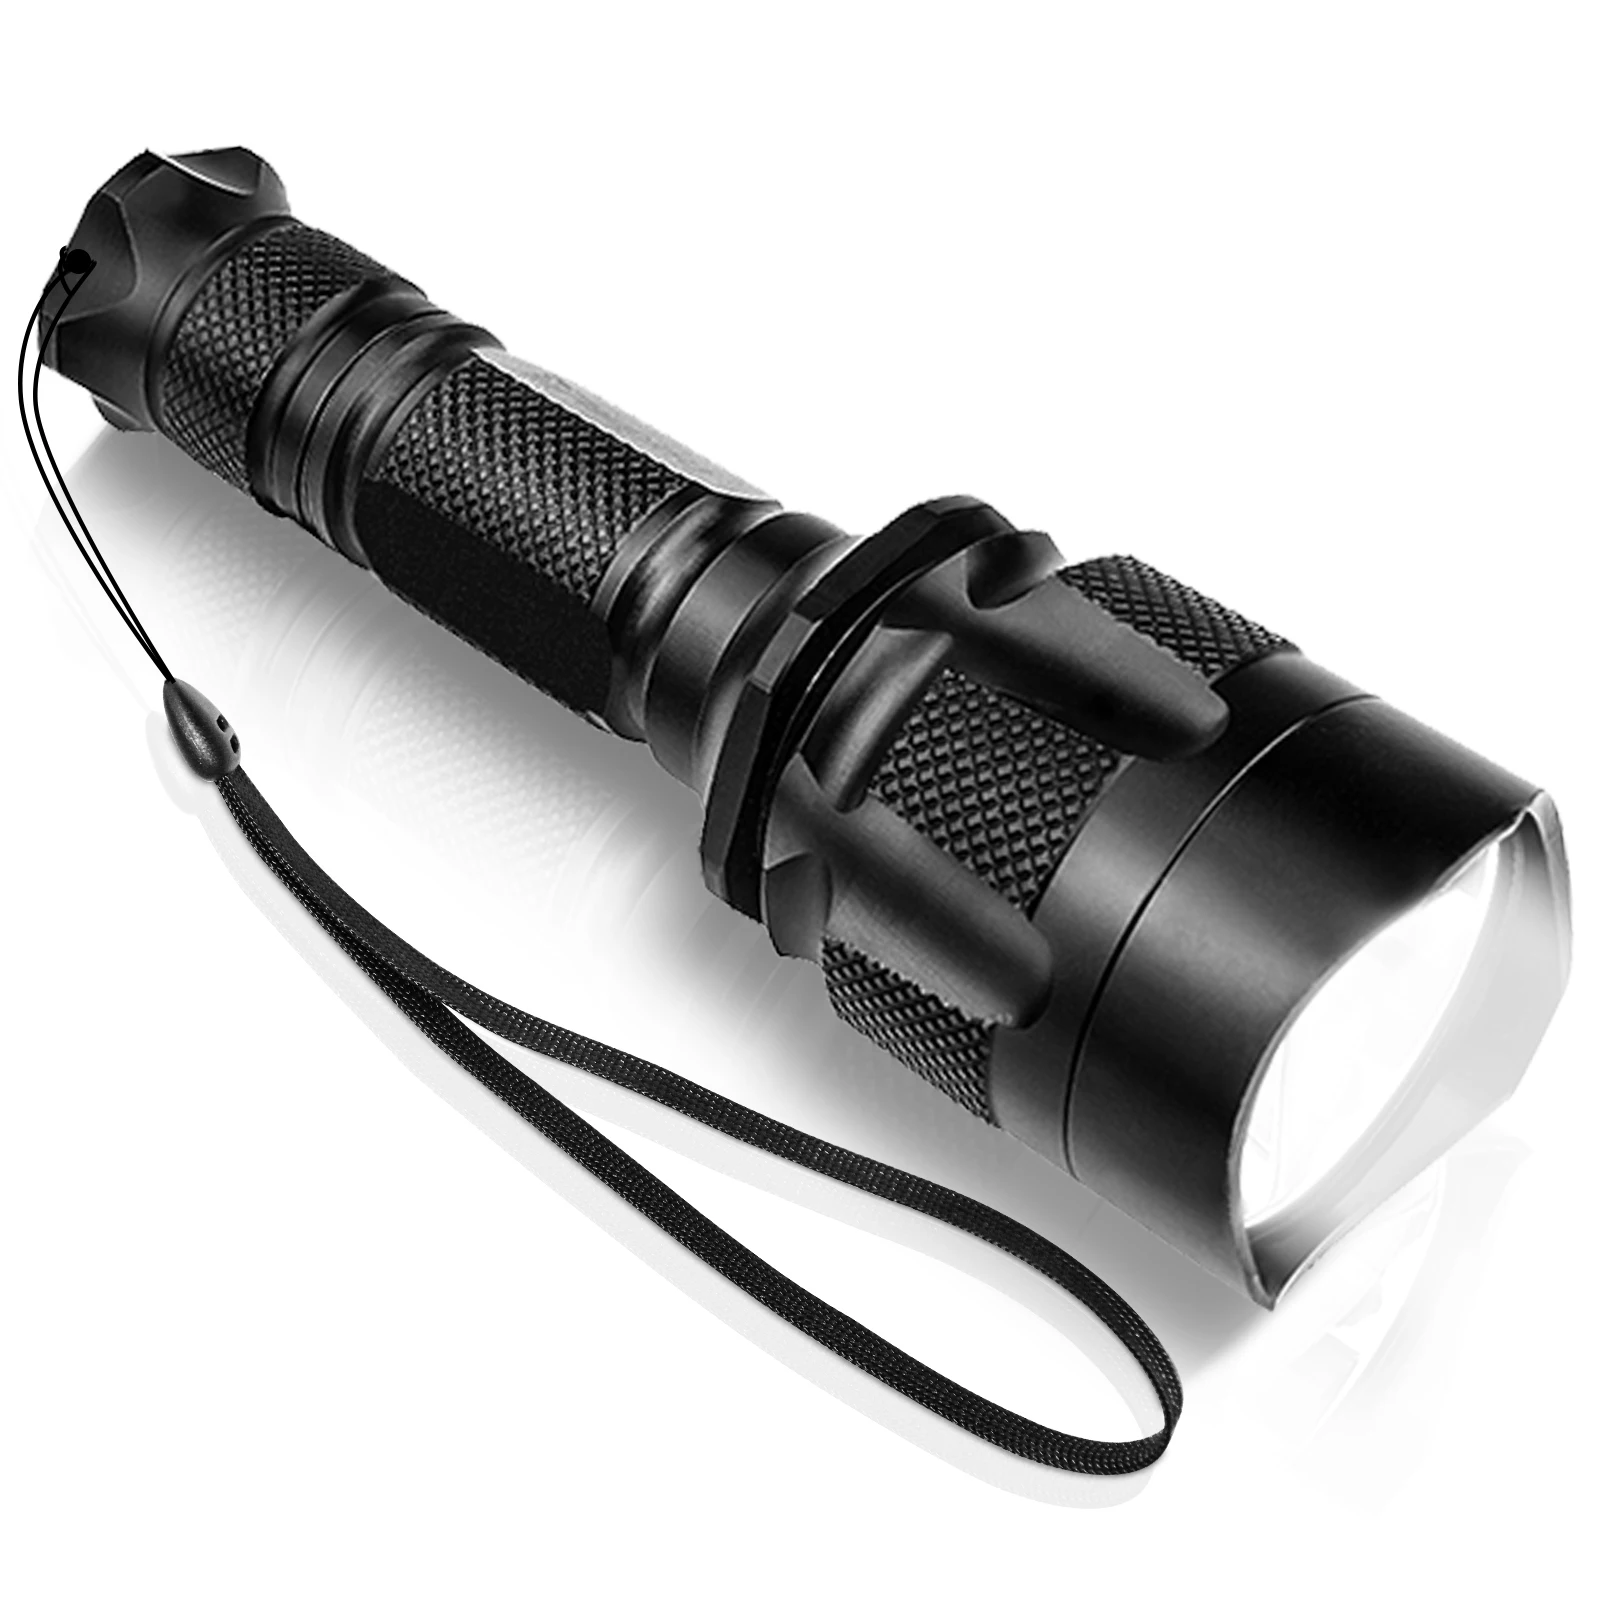 

UniqueFire M11 Super Bright Powerful White Light XM-L2 LED Flashlight 5 Modes Waterproof Outdoor Camping Tactica Torch Lantern